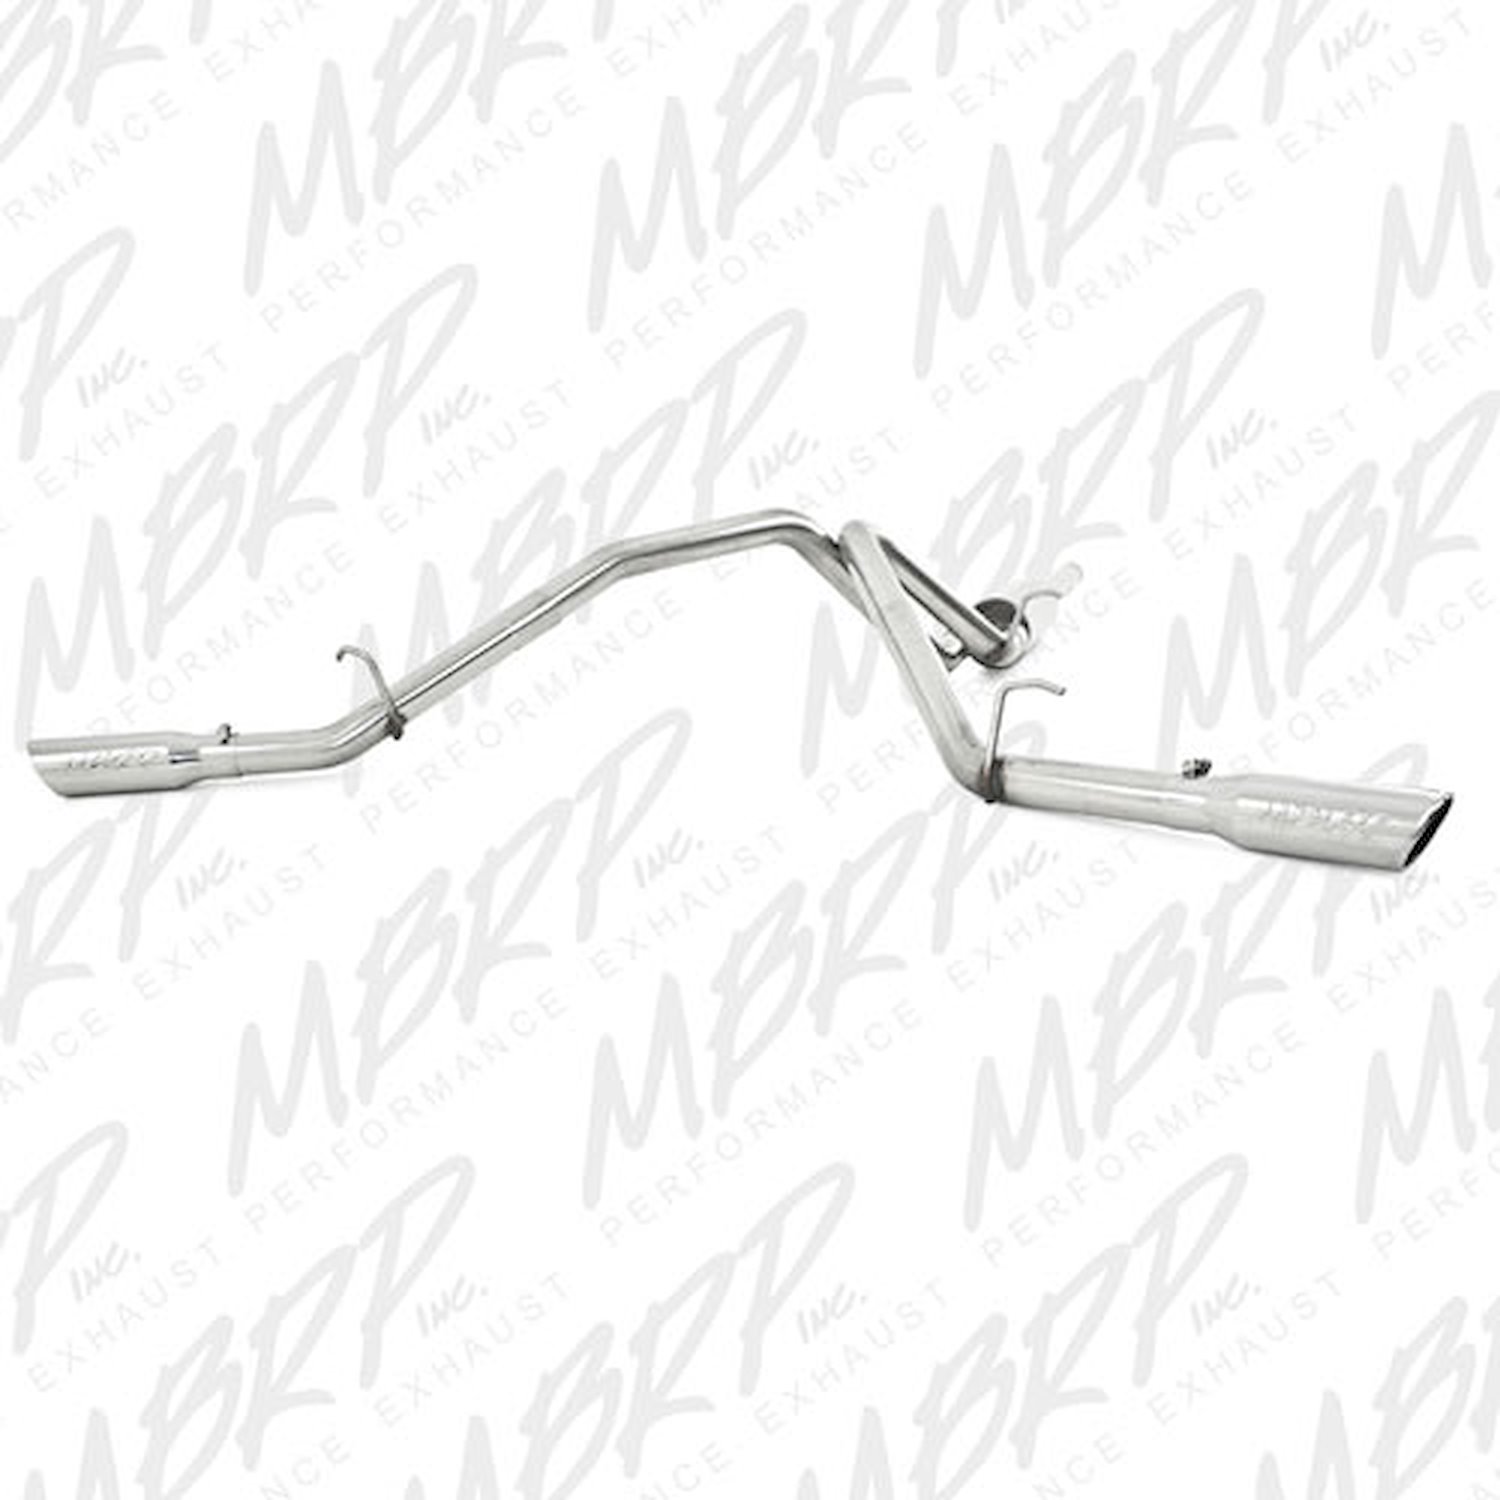 XP Series Exhaust System 2009-2011 GM 1500 4.8/5.3L